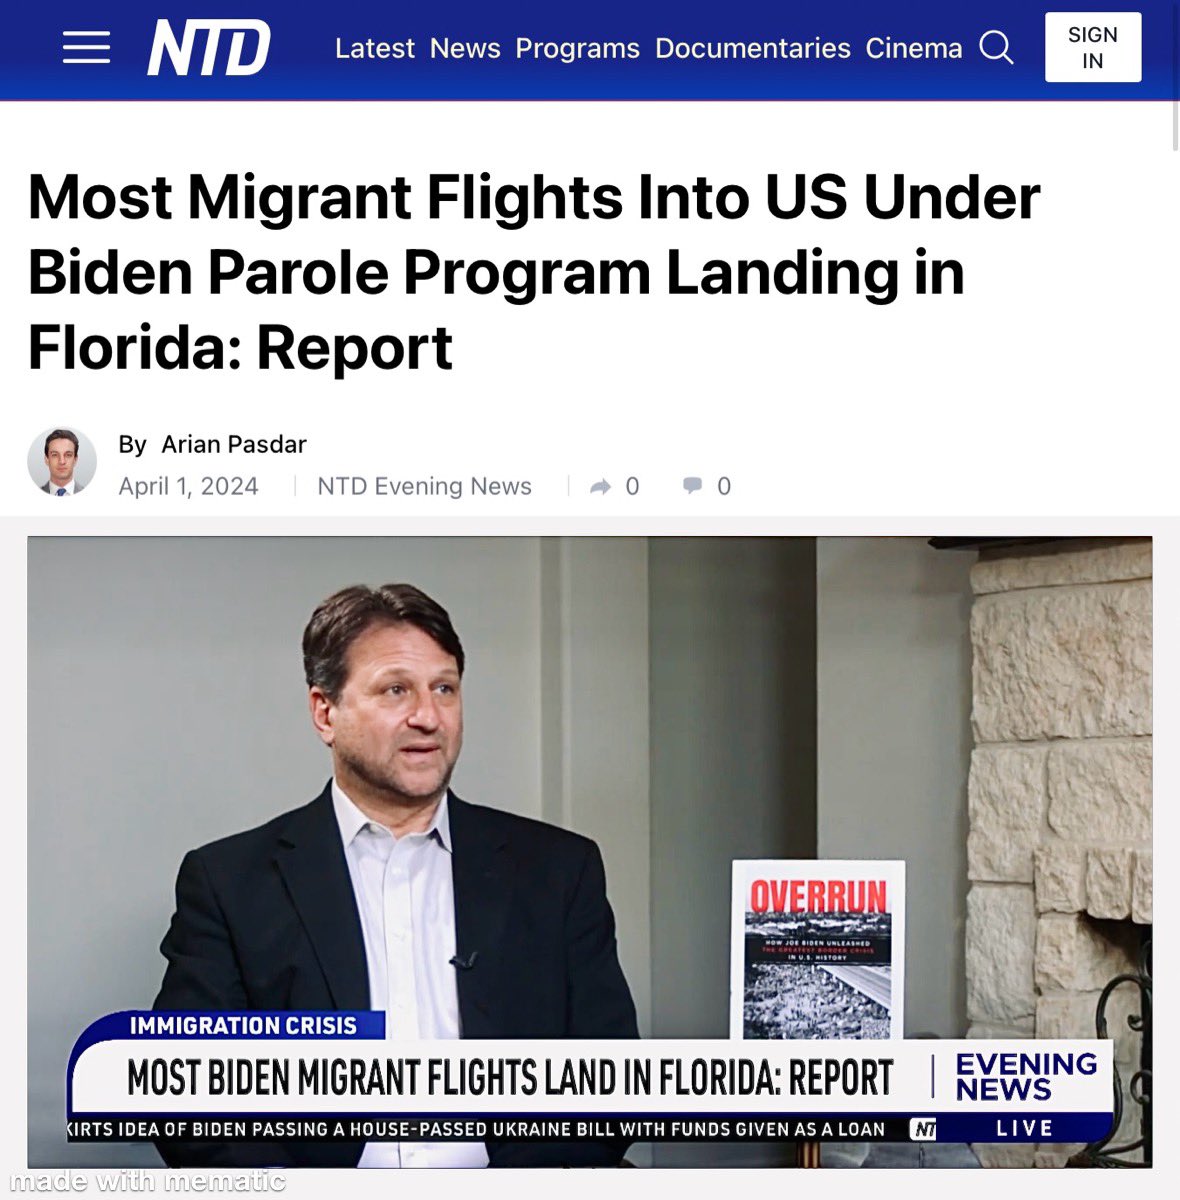 A report by @BensmanTodd of @CIS_org on April 1 showed that most of the over 386,000 migrant flights into the US under a Biden parole program are landing in Florida—a state that has already sued the administration to end the controversial #CBPOne program. ntd.com/most-migrant-f…